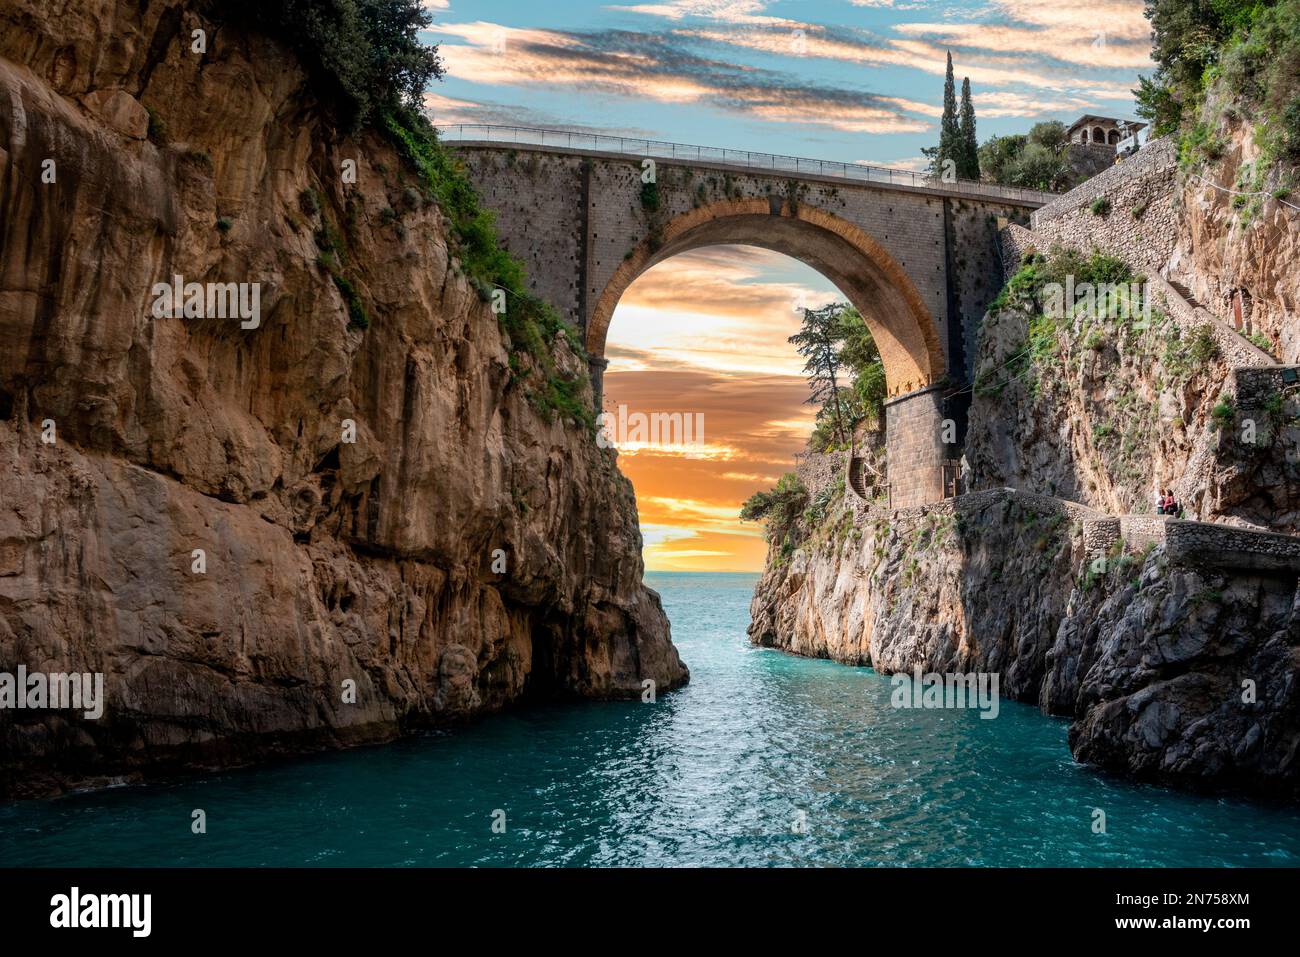 Scenic arch bridge at the Fjord of Fury, Amalfi Coast of Southern Italy Stock Photo